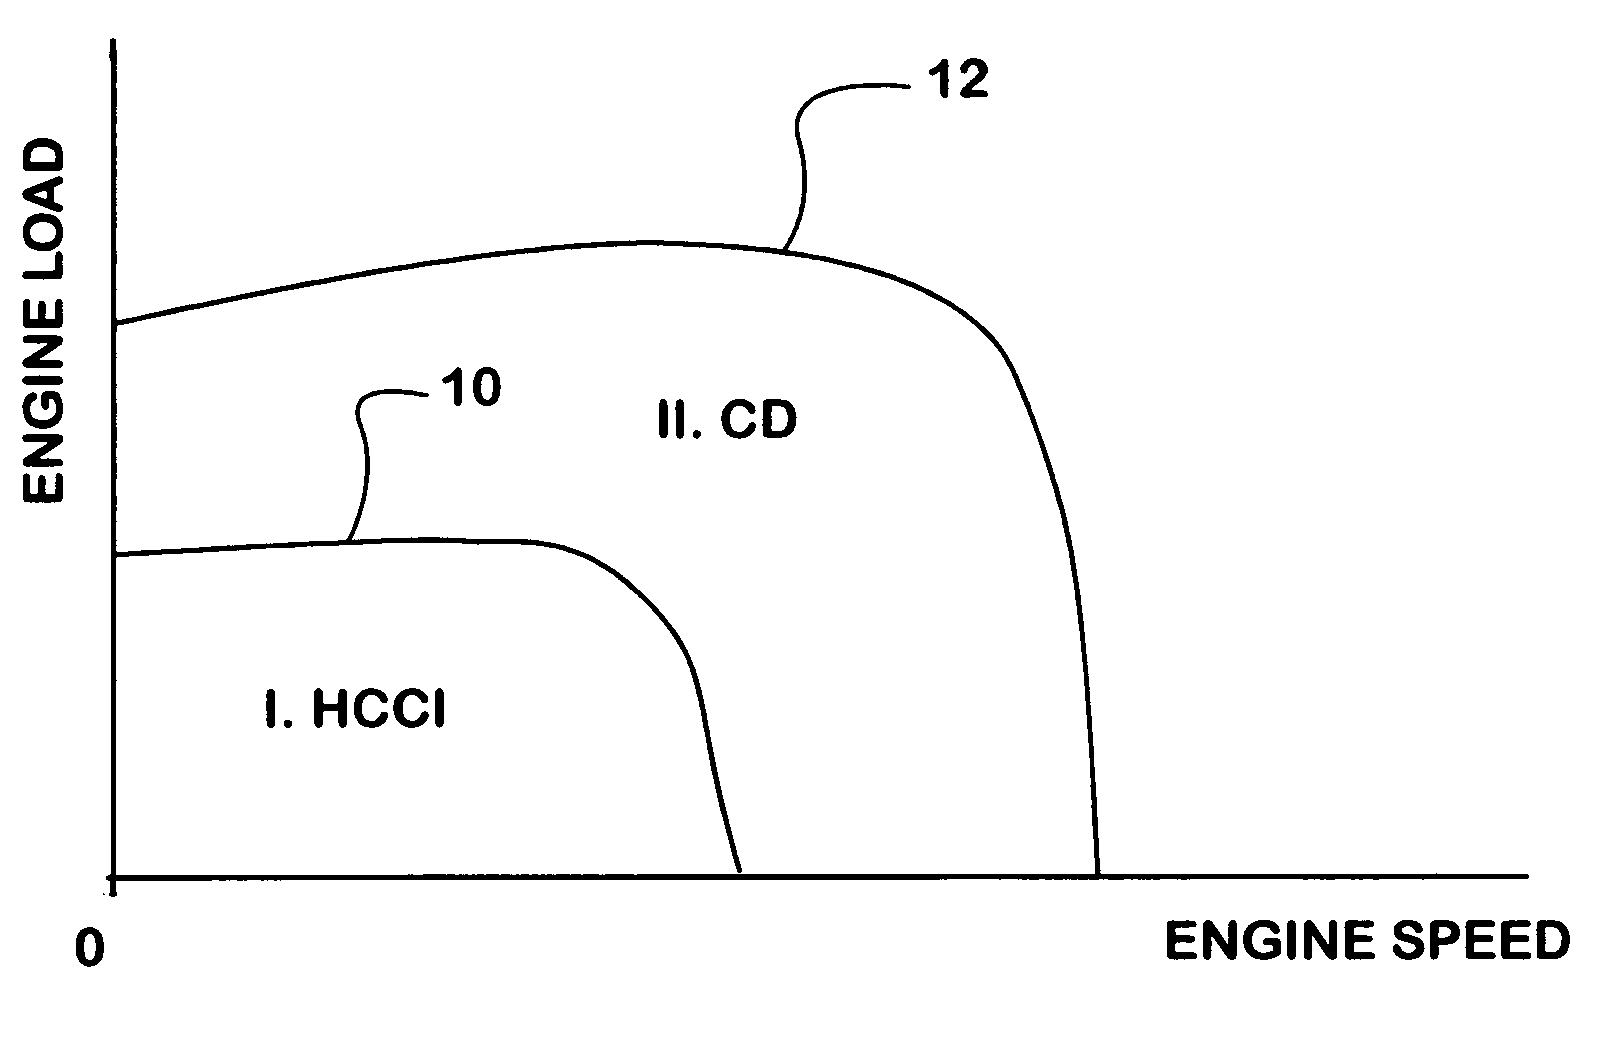 Control strategy for HCCI-CD combustion in a diesel engine using two fuel injection phases